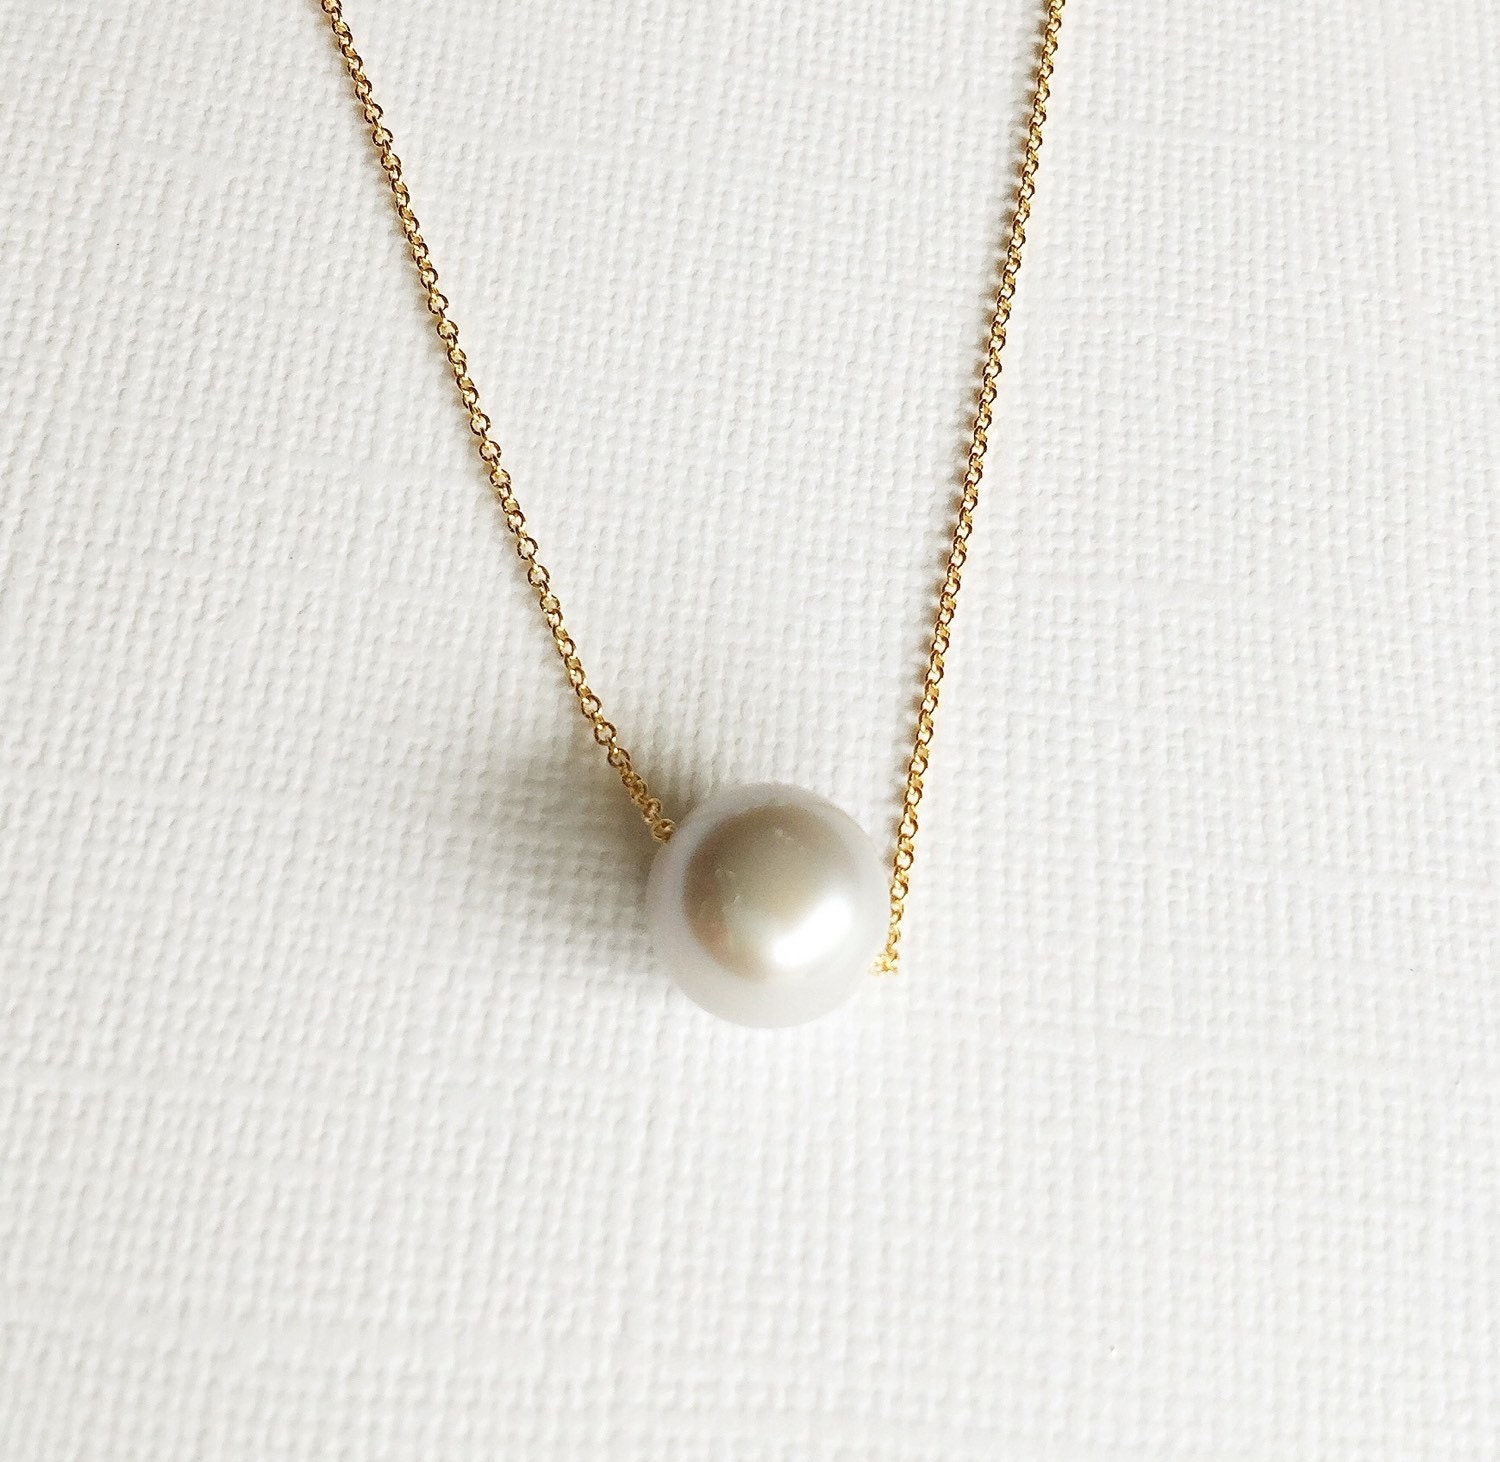 Necklace Kea Silver Pearl Necklace Floating Pearl Necklace - Etsy